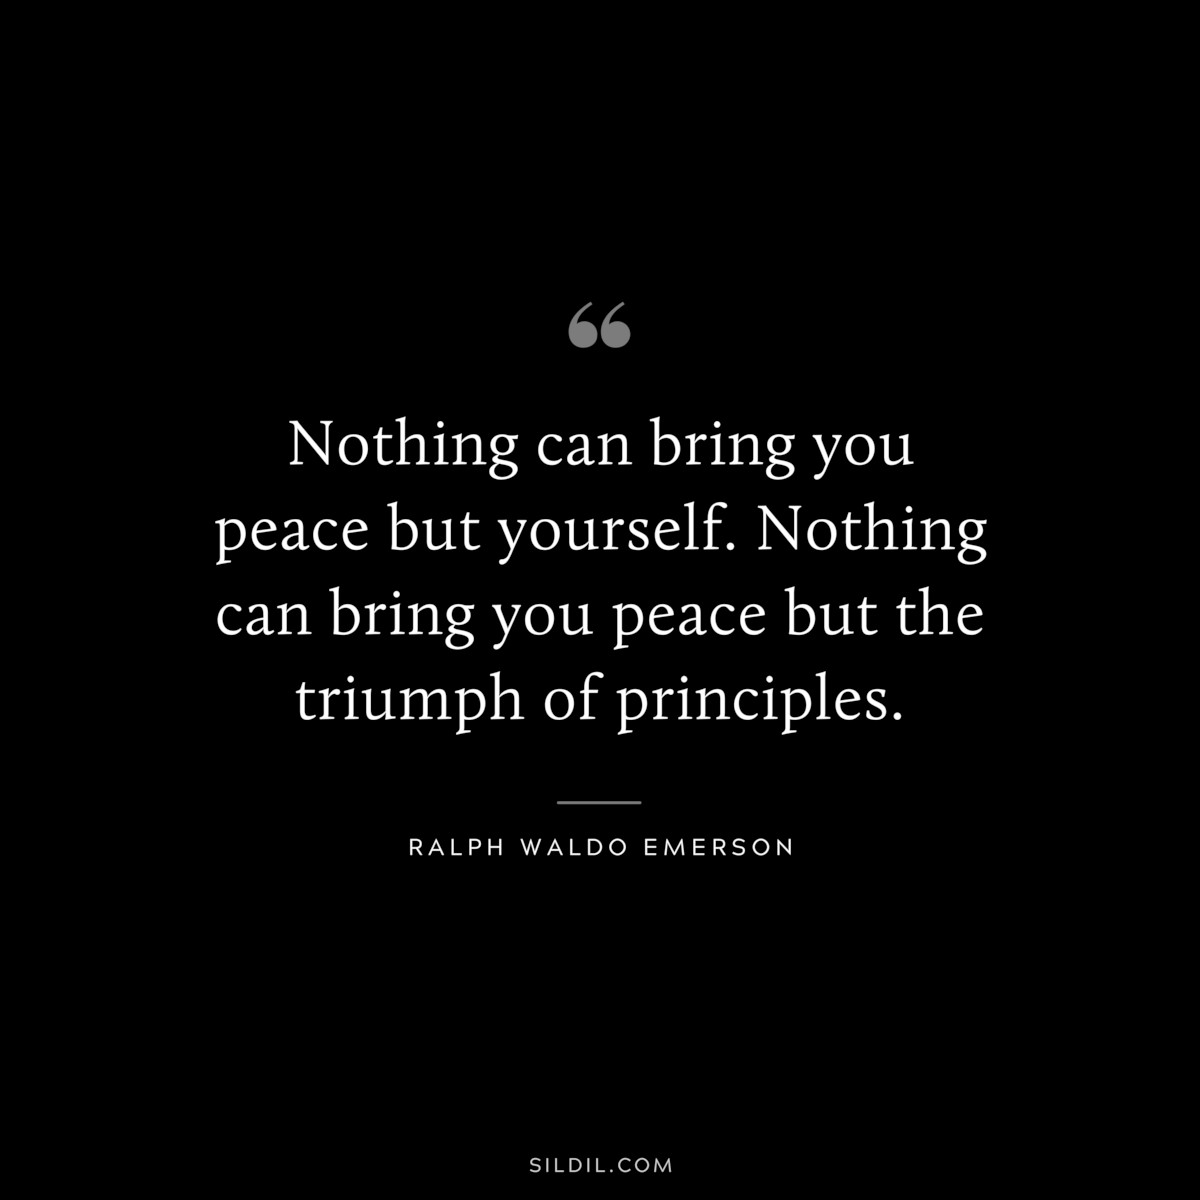 Nothing can bring you peace but yourself. Nothing can bring you peace but the triumph of principles. — Ralph Waldo Emerson